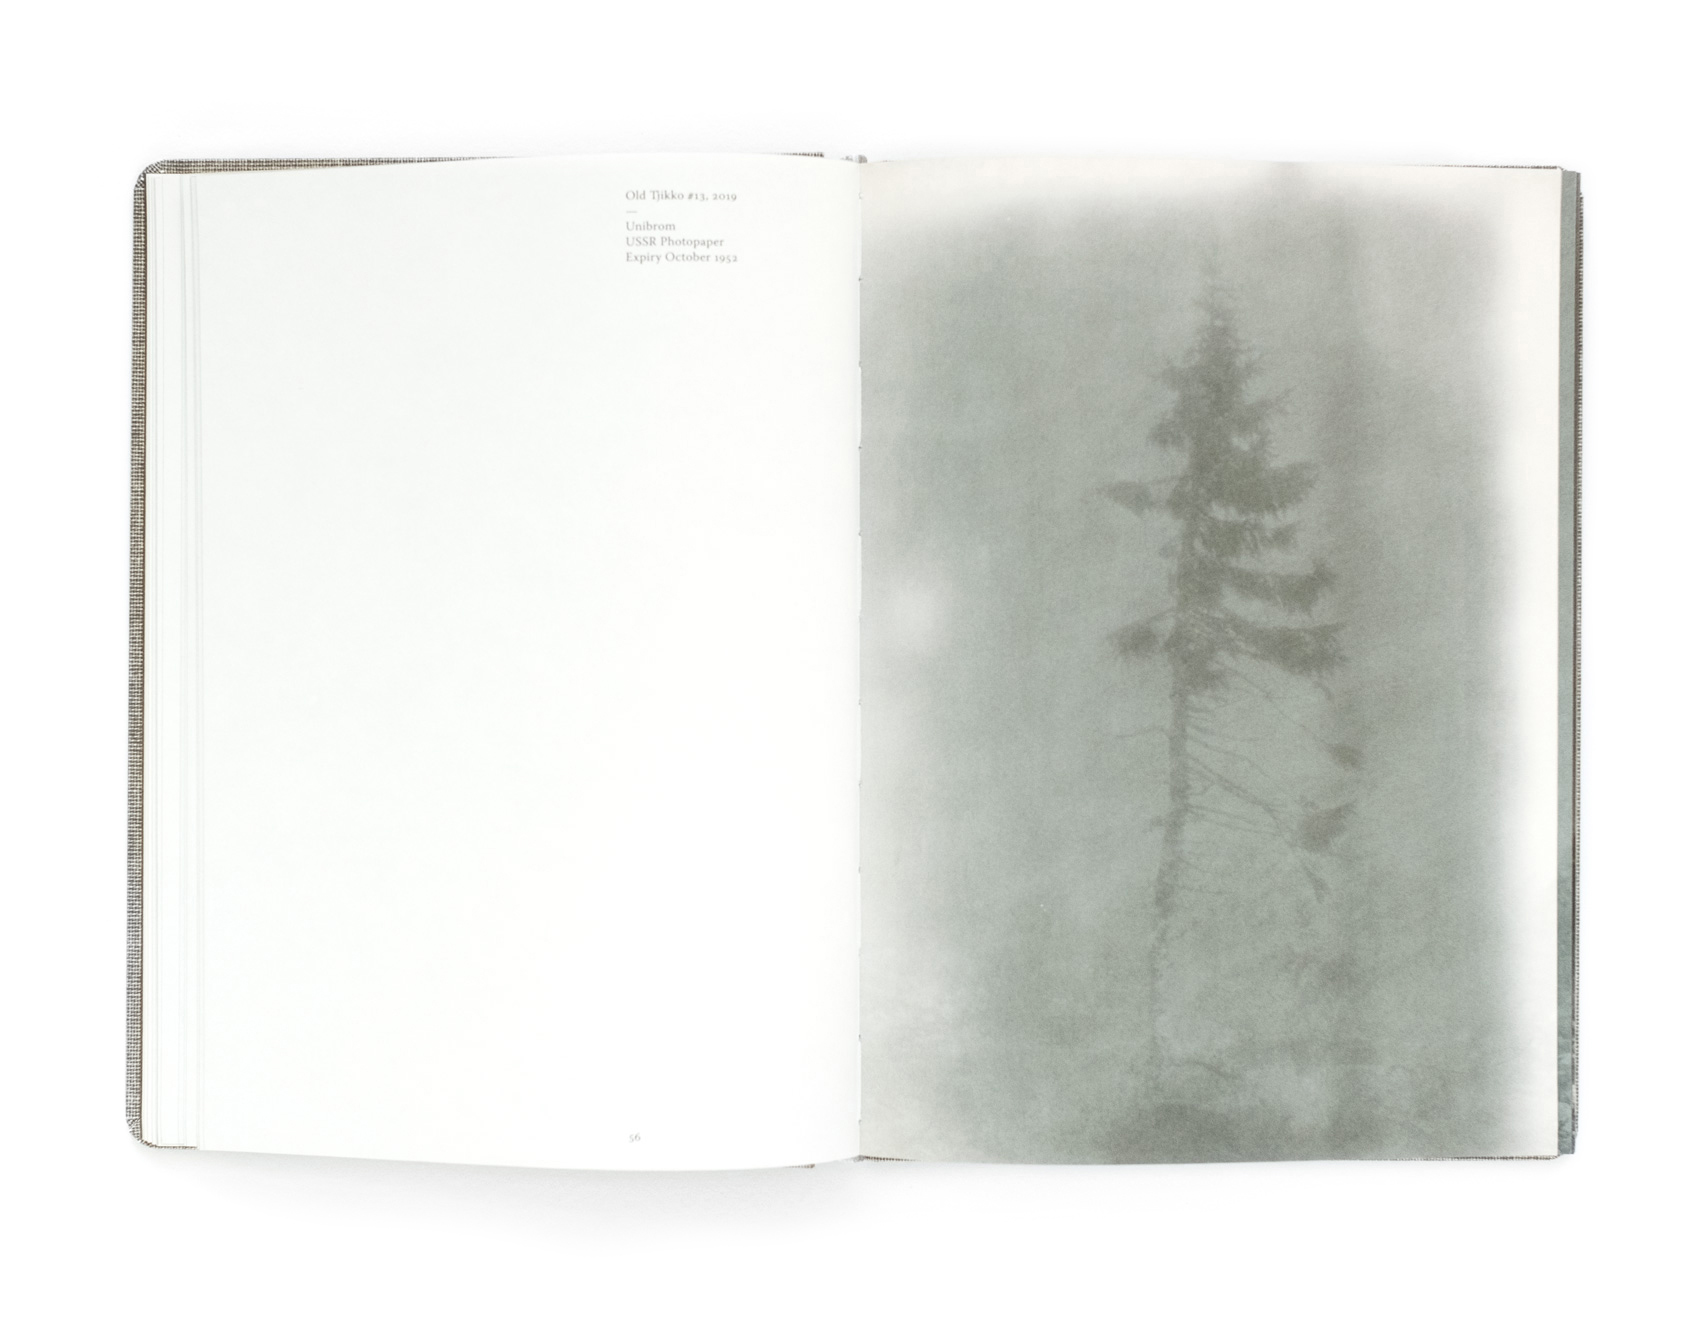 Old Tjikko - spread from the book by Nicolai Howalt